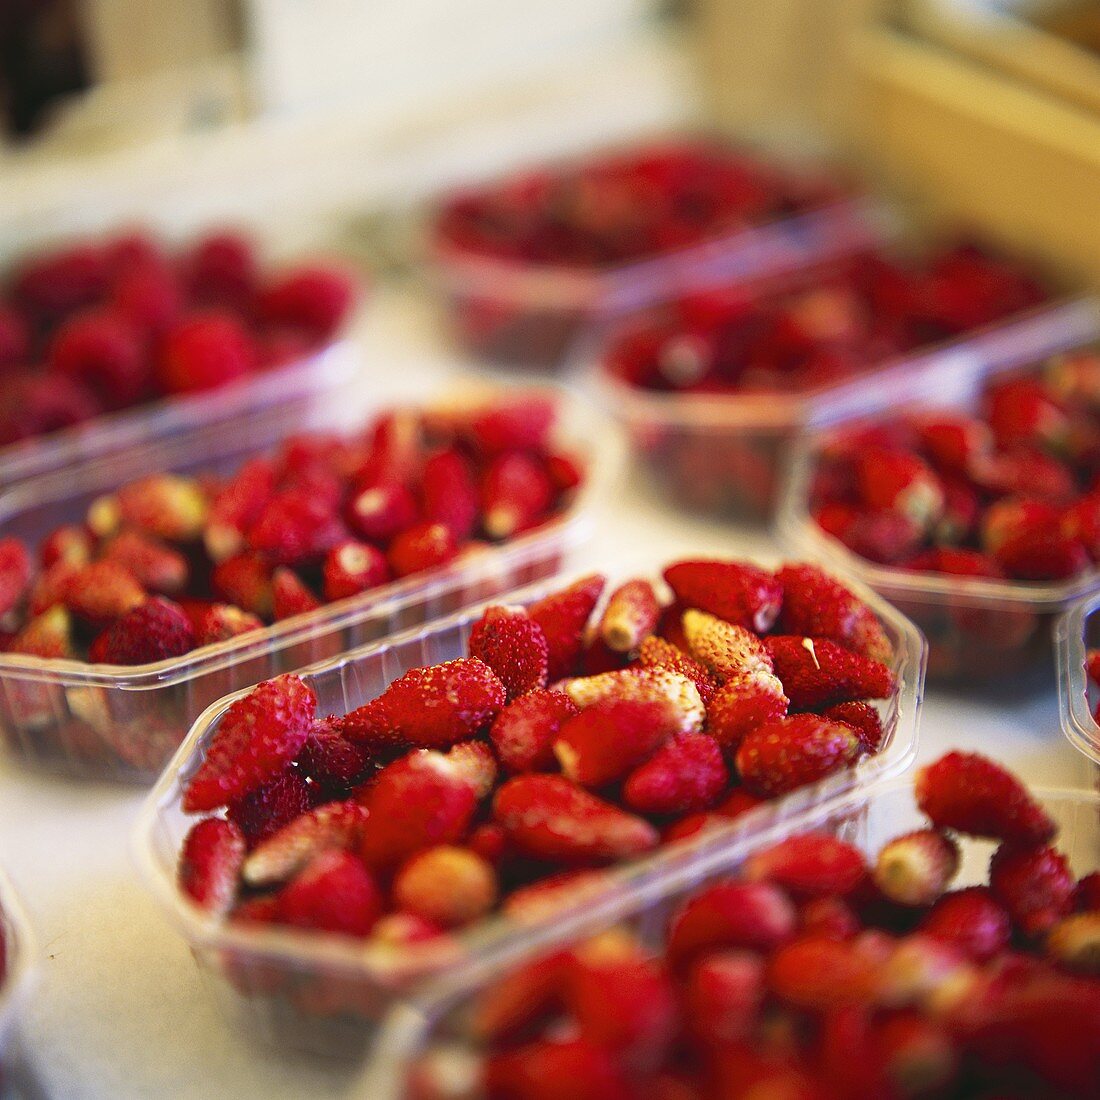 Wild Strawberries in Plastic Containers